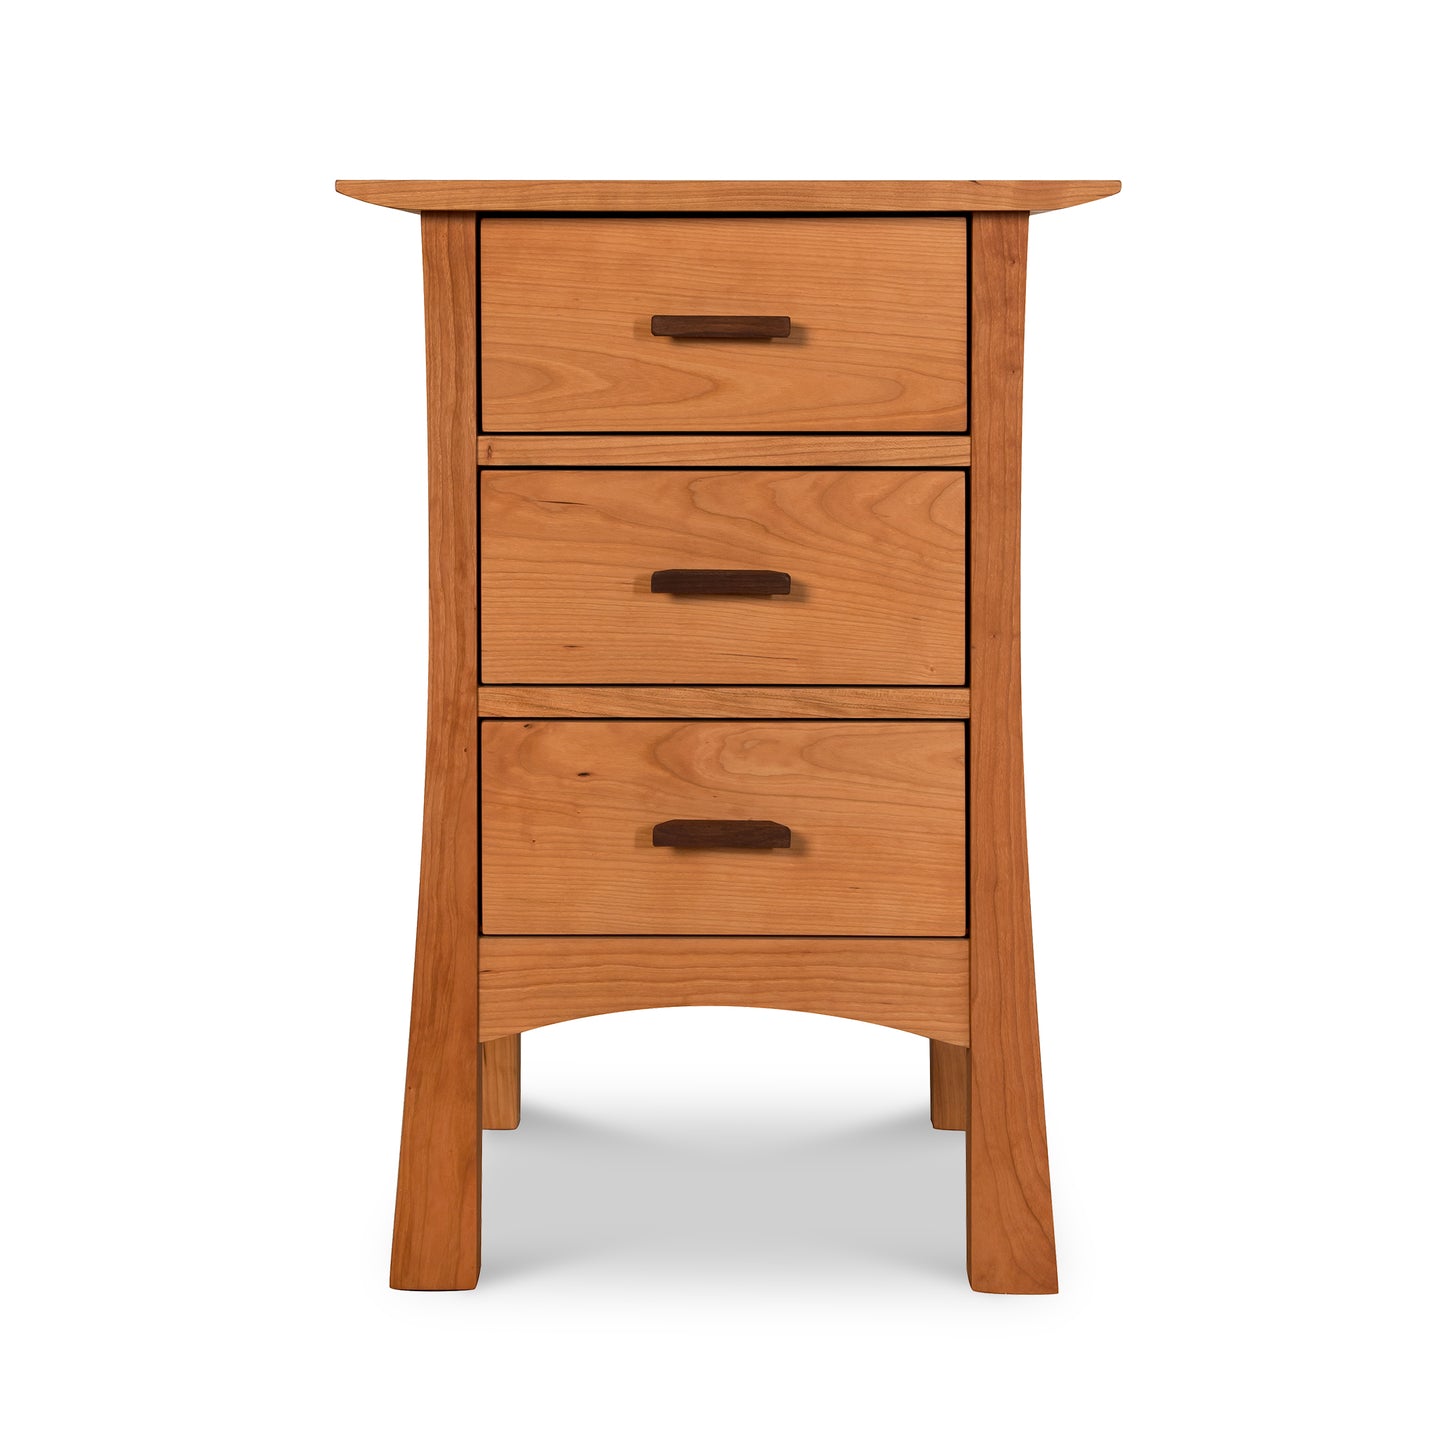 Contemporary Craftsman 3-Drawer Nightstand from Vermont Furniture Designs, with a slightly curved top and tapered legs against a white background, coated with an eco-friendly oil finish.